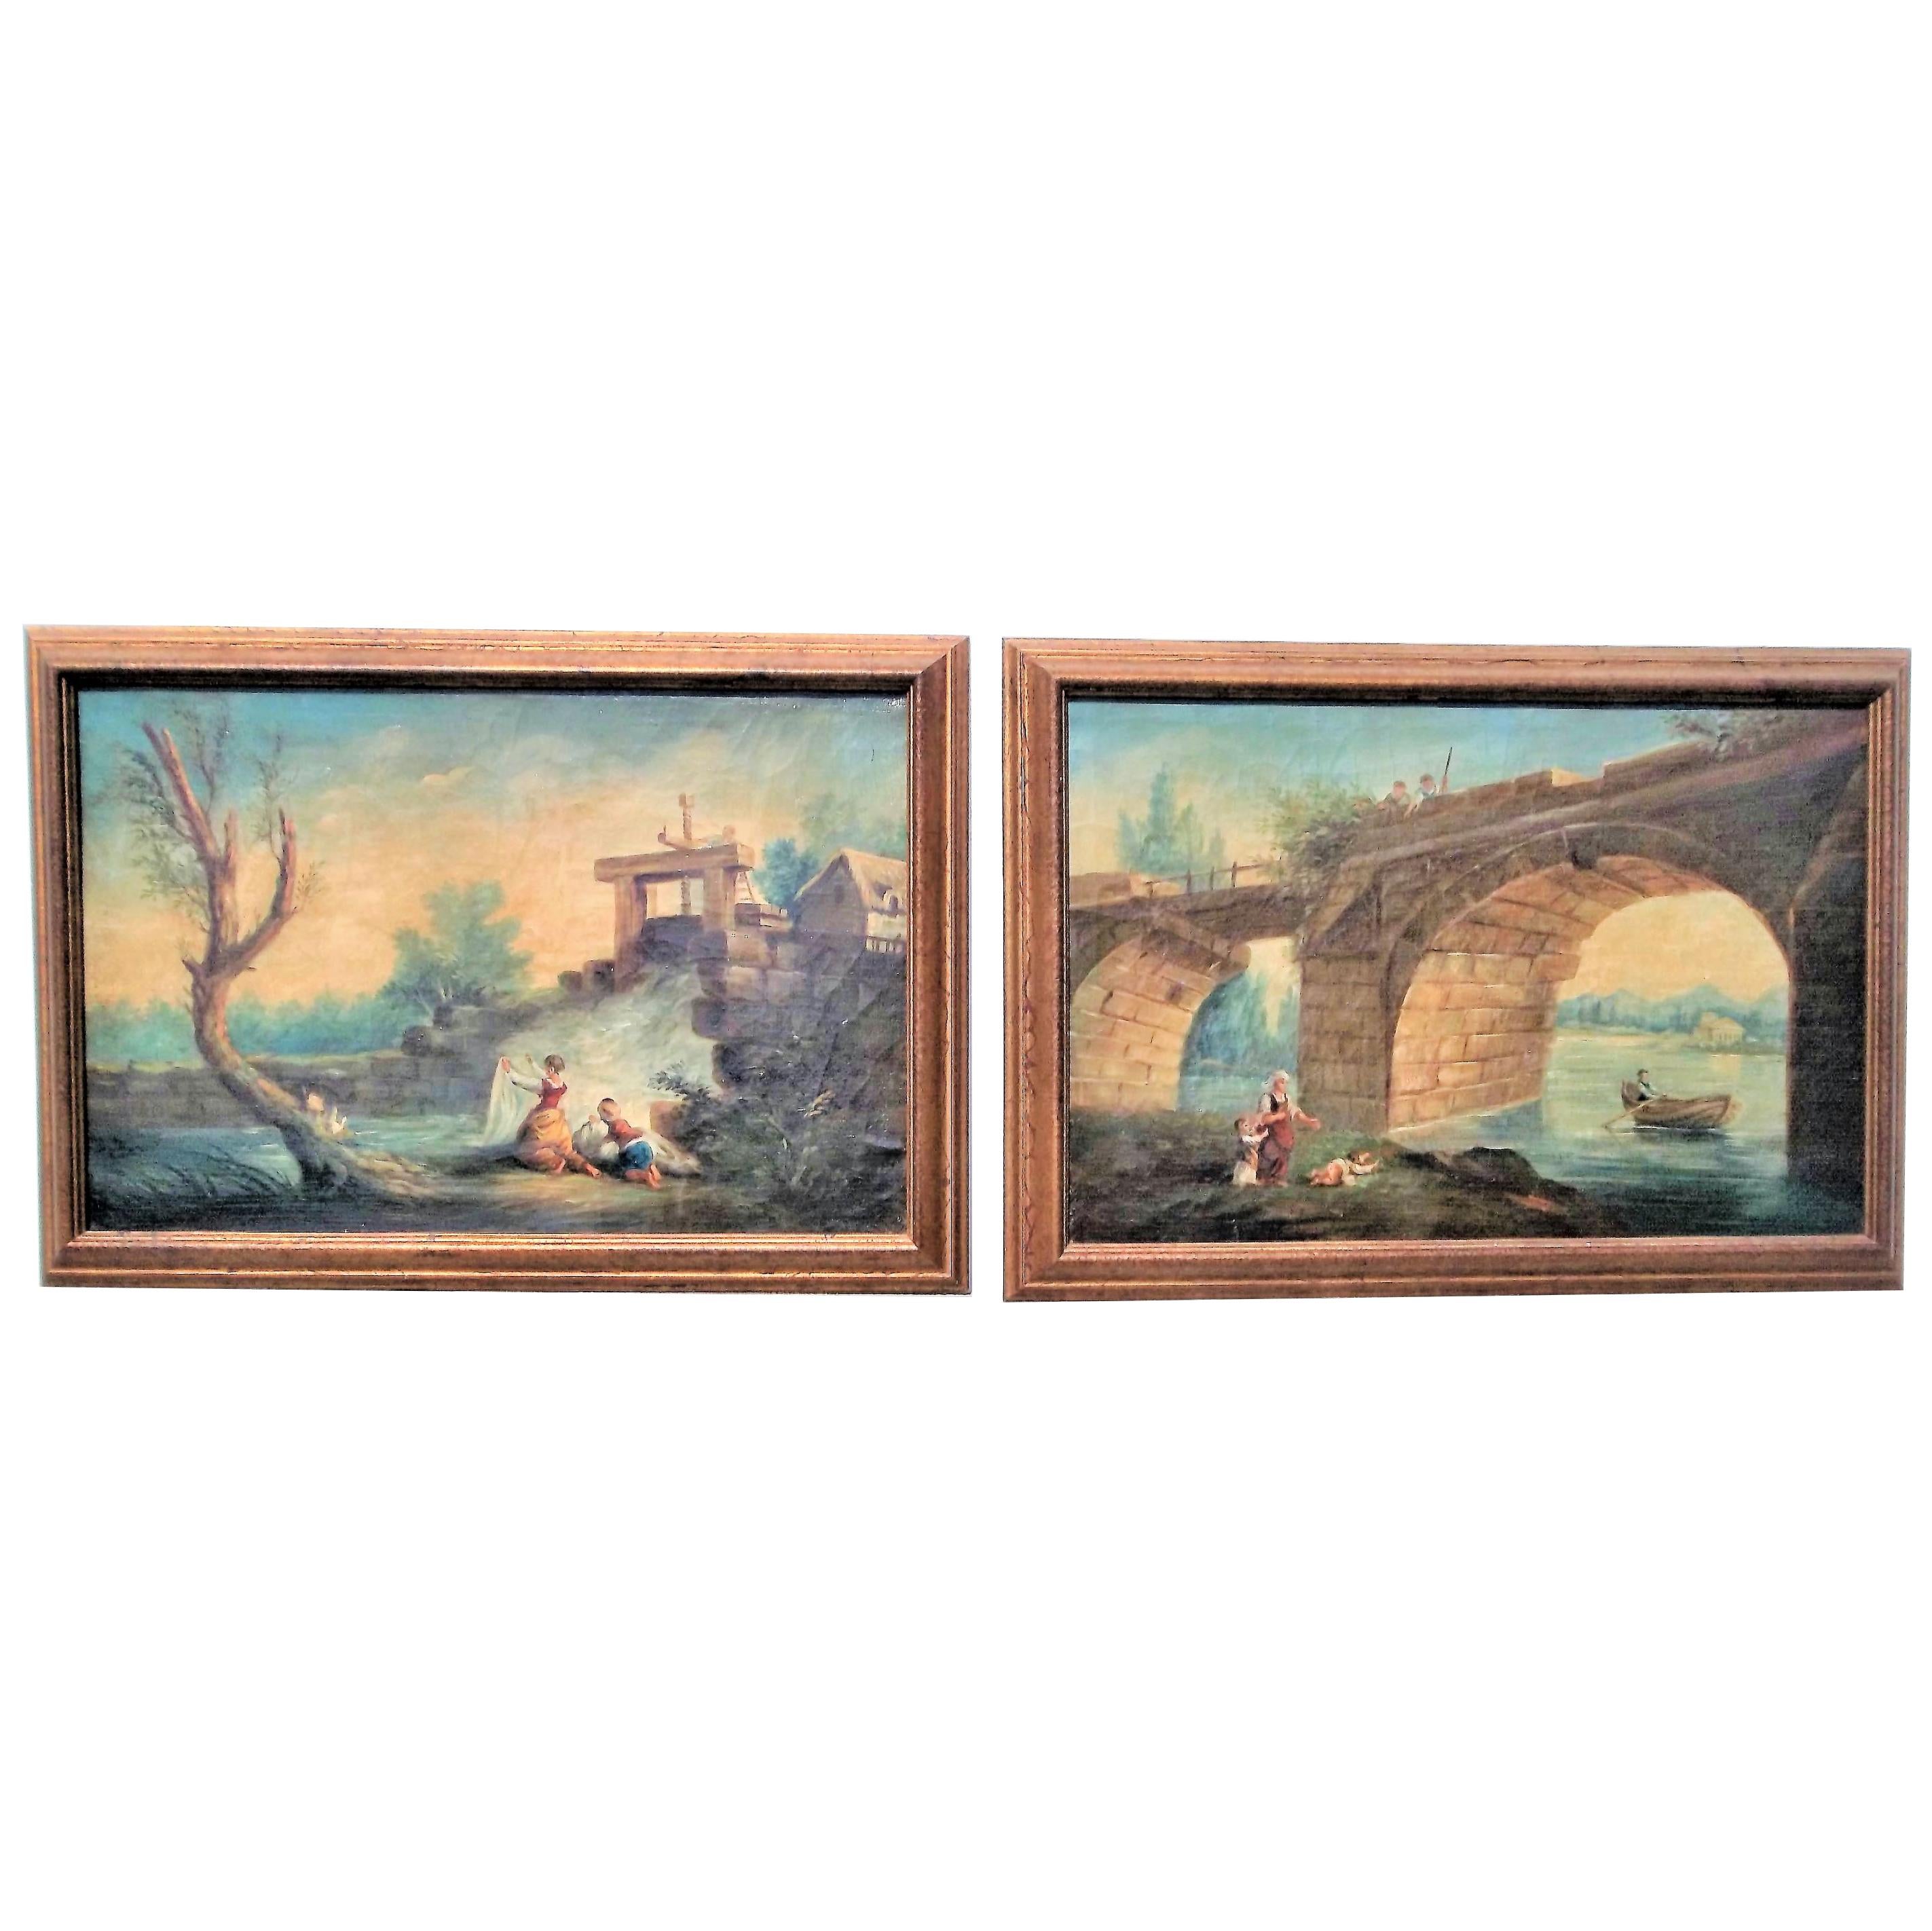 Pair of Rococo Style Landscapes  After Francois Boucher Oils on Canvas